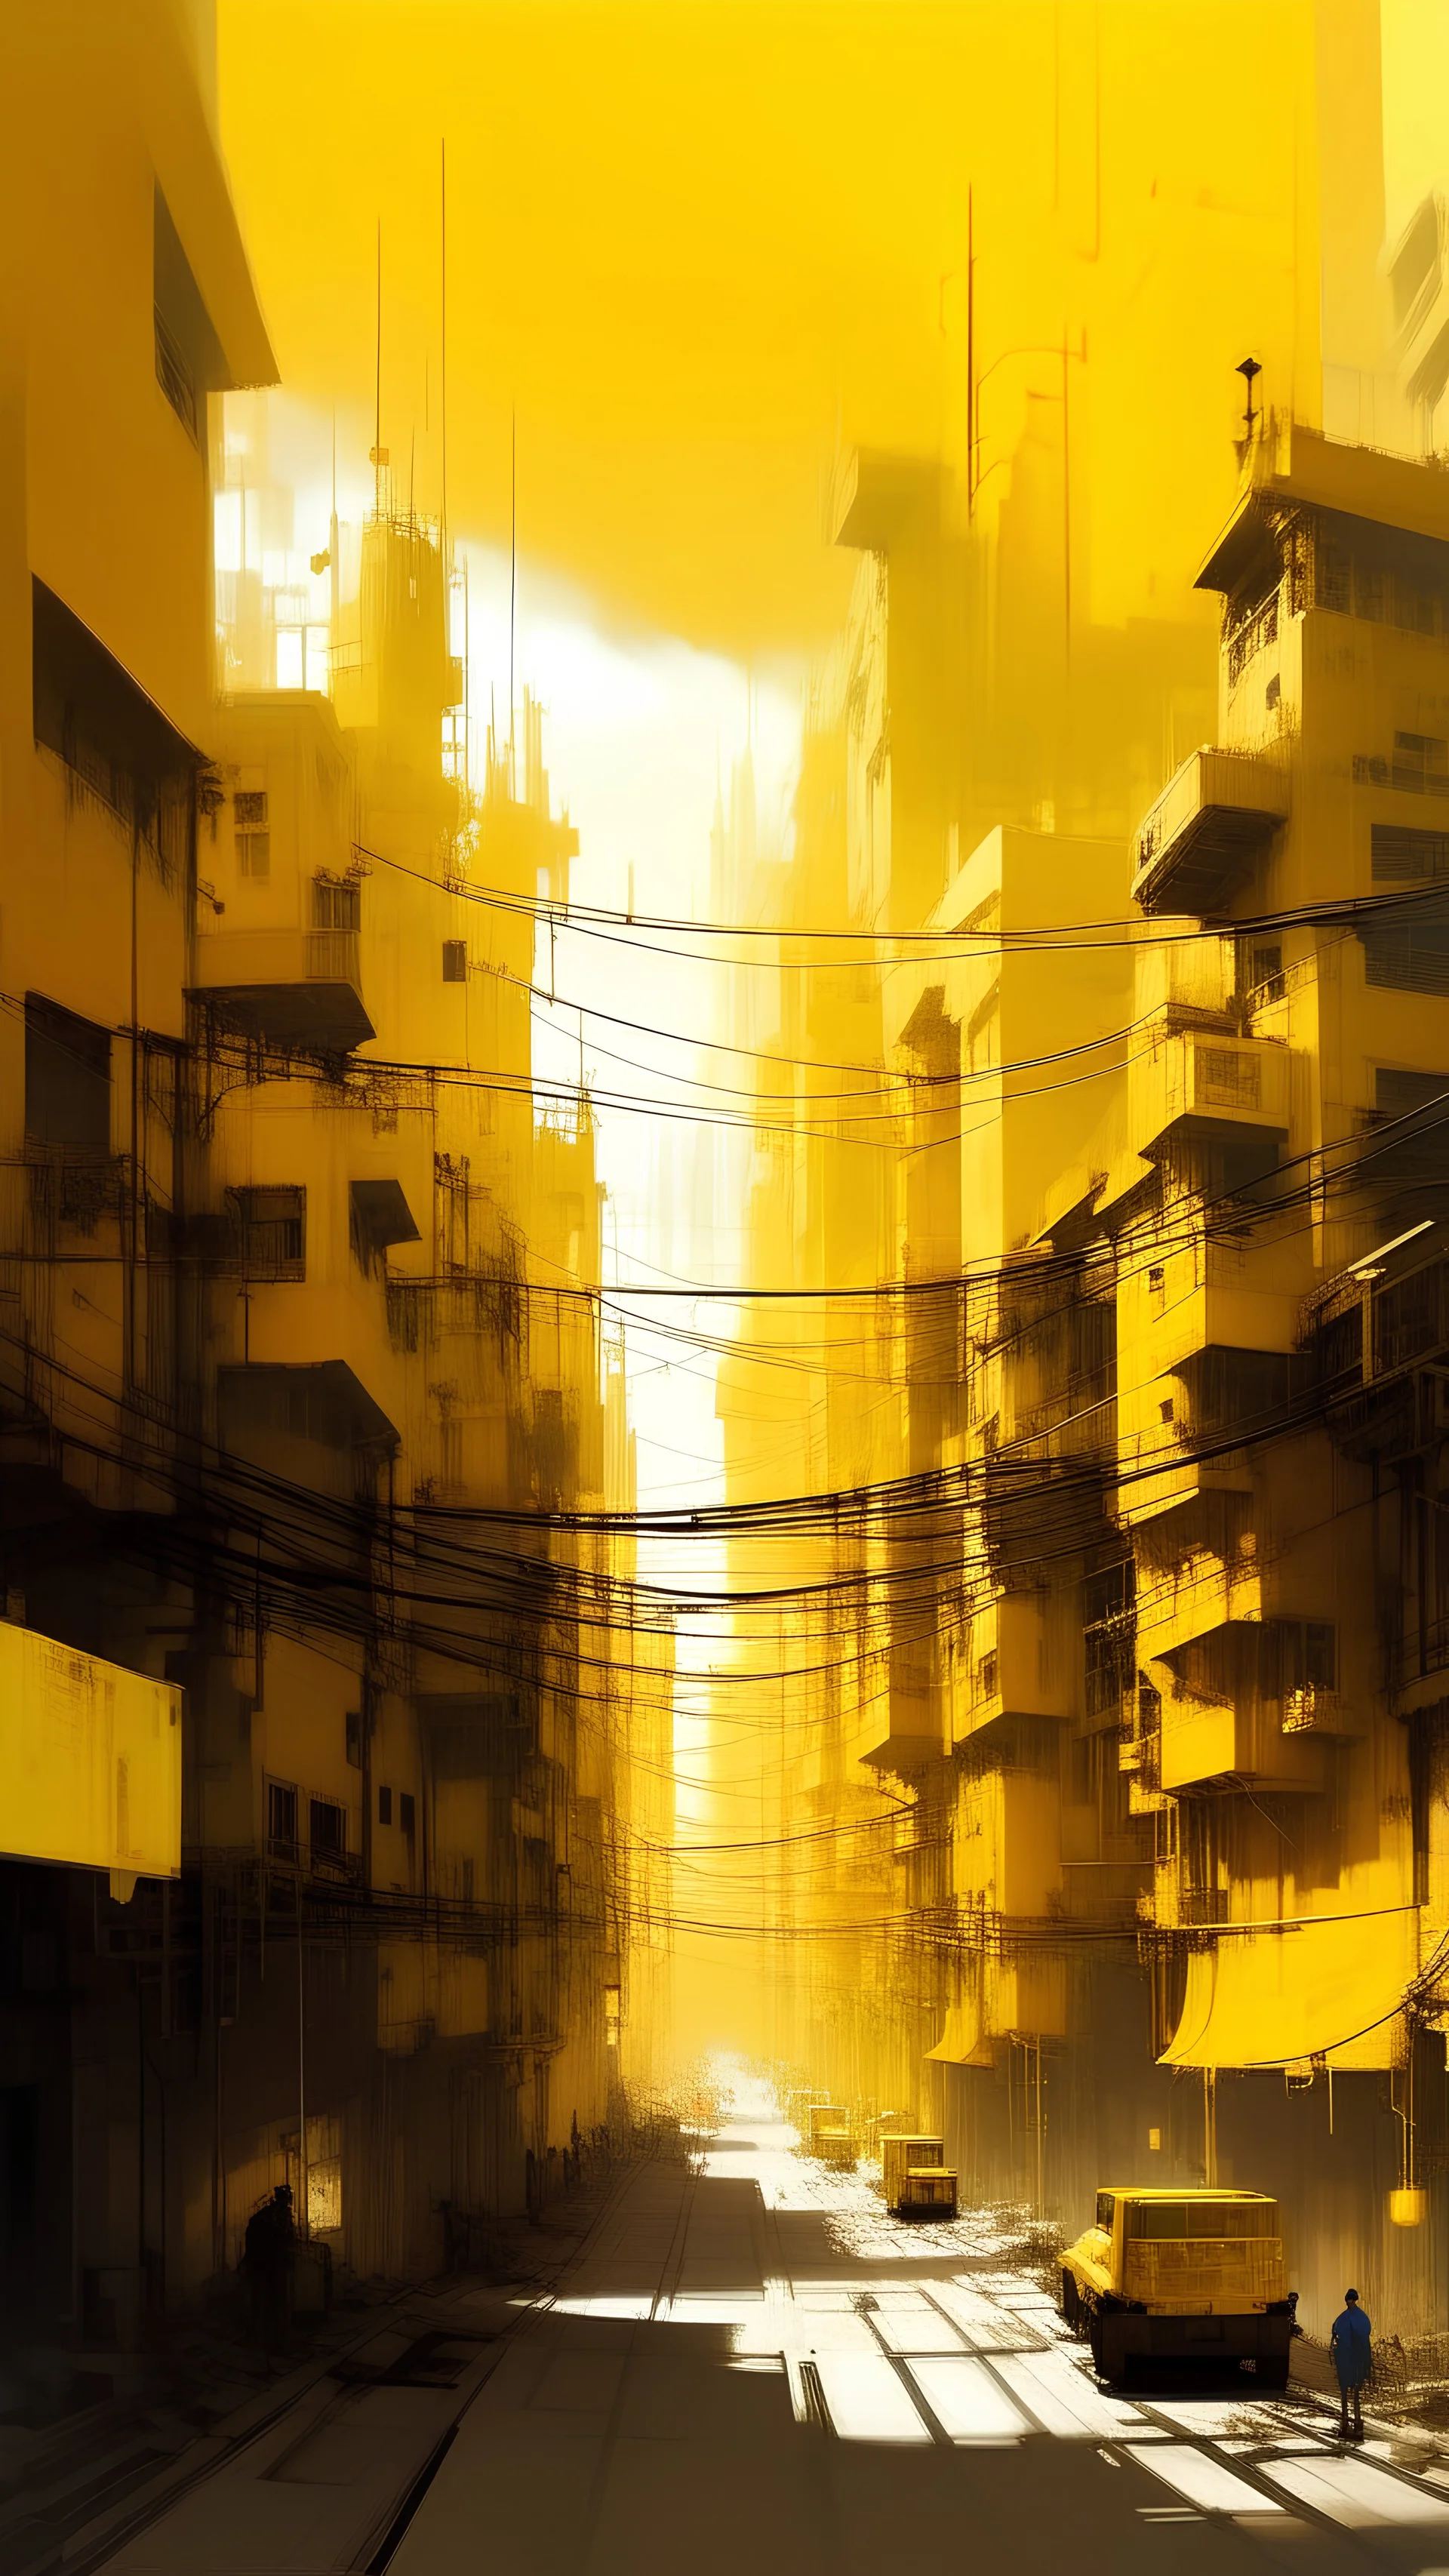 A yellow electrical city painted by Zosan